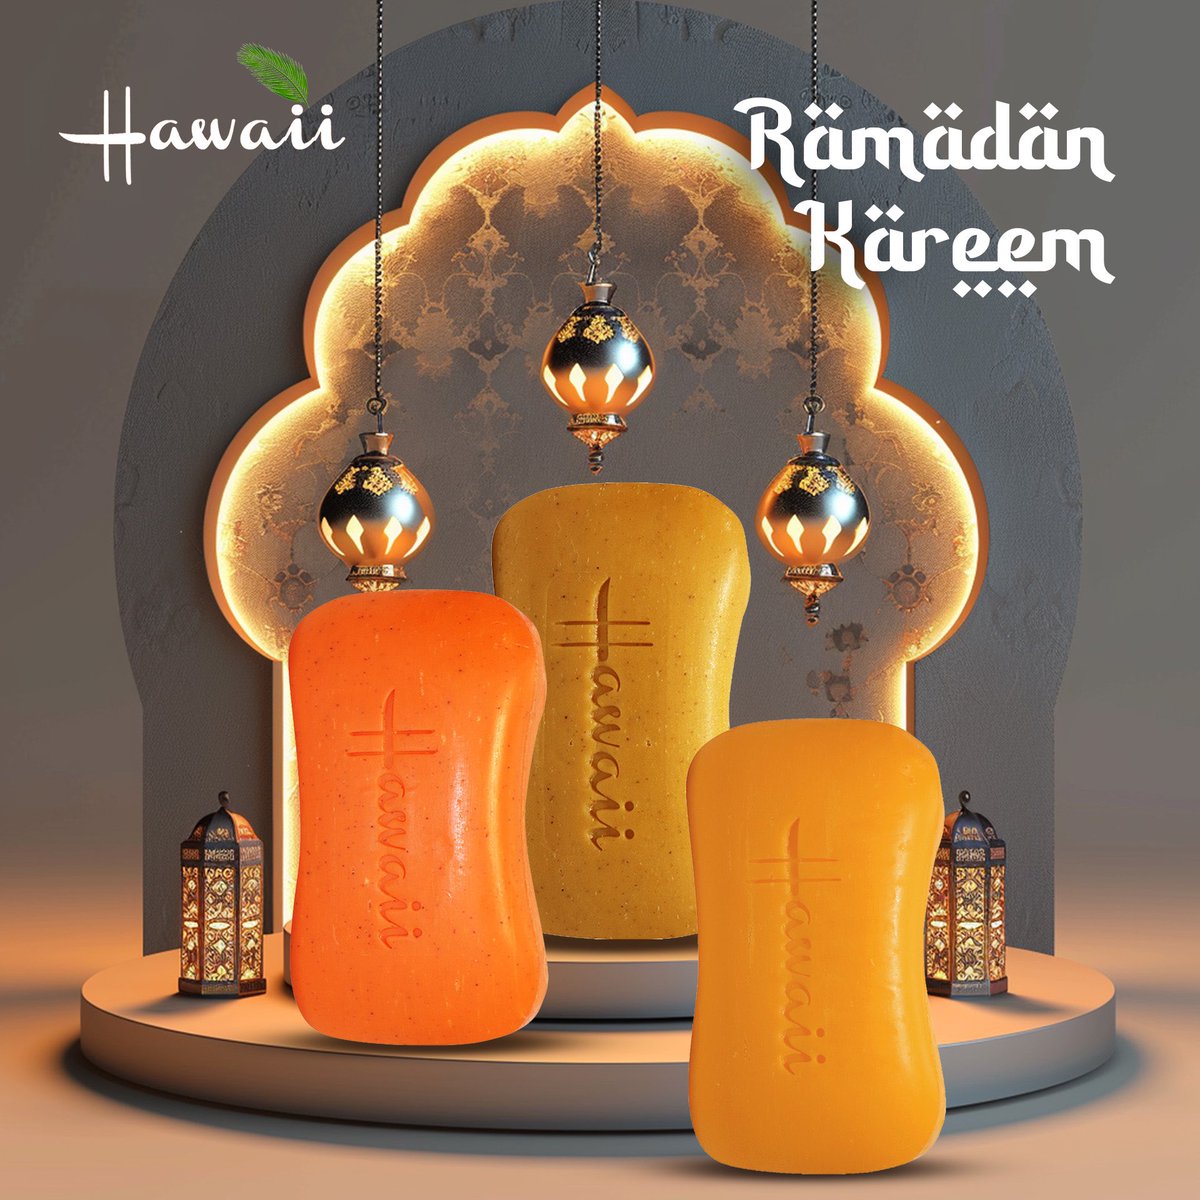 As we embark on this holy journey of self-reflection and spiritual growth, prioritise your well-being. Embrace the beauty of Ramadan with a healthy glow that emanates from within. #HawaiiNIgeria #HawaiiSoap #RamadanKareem